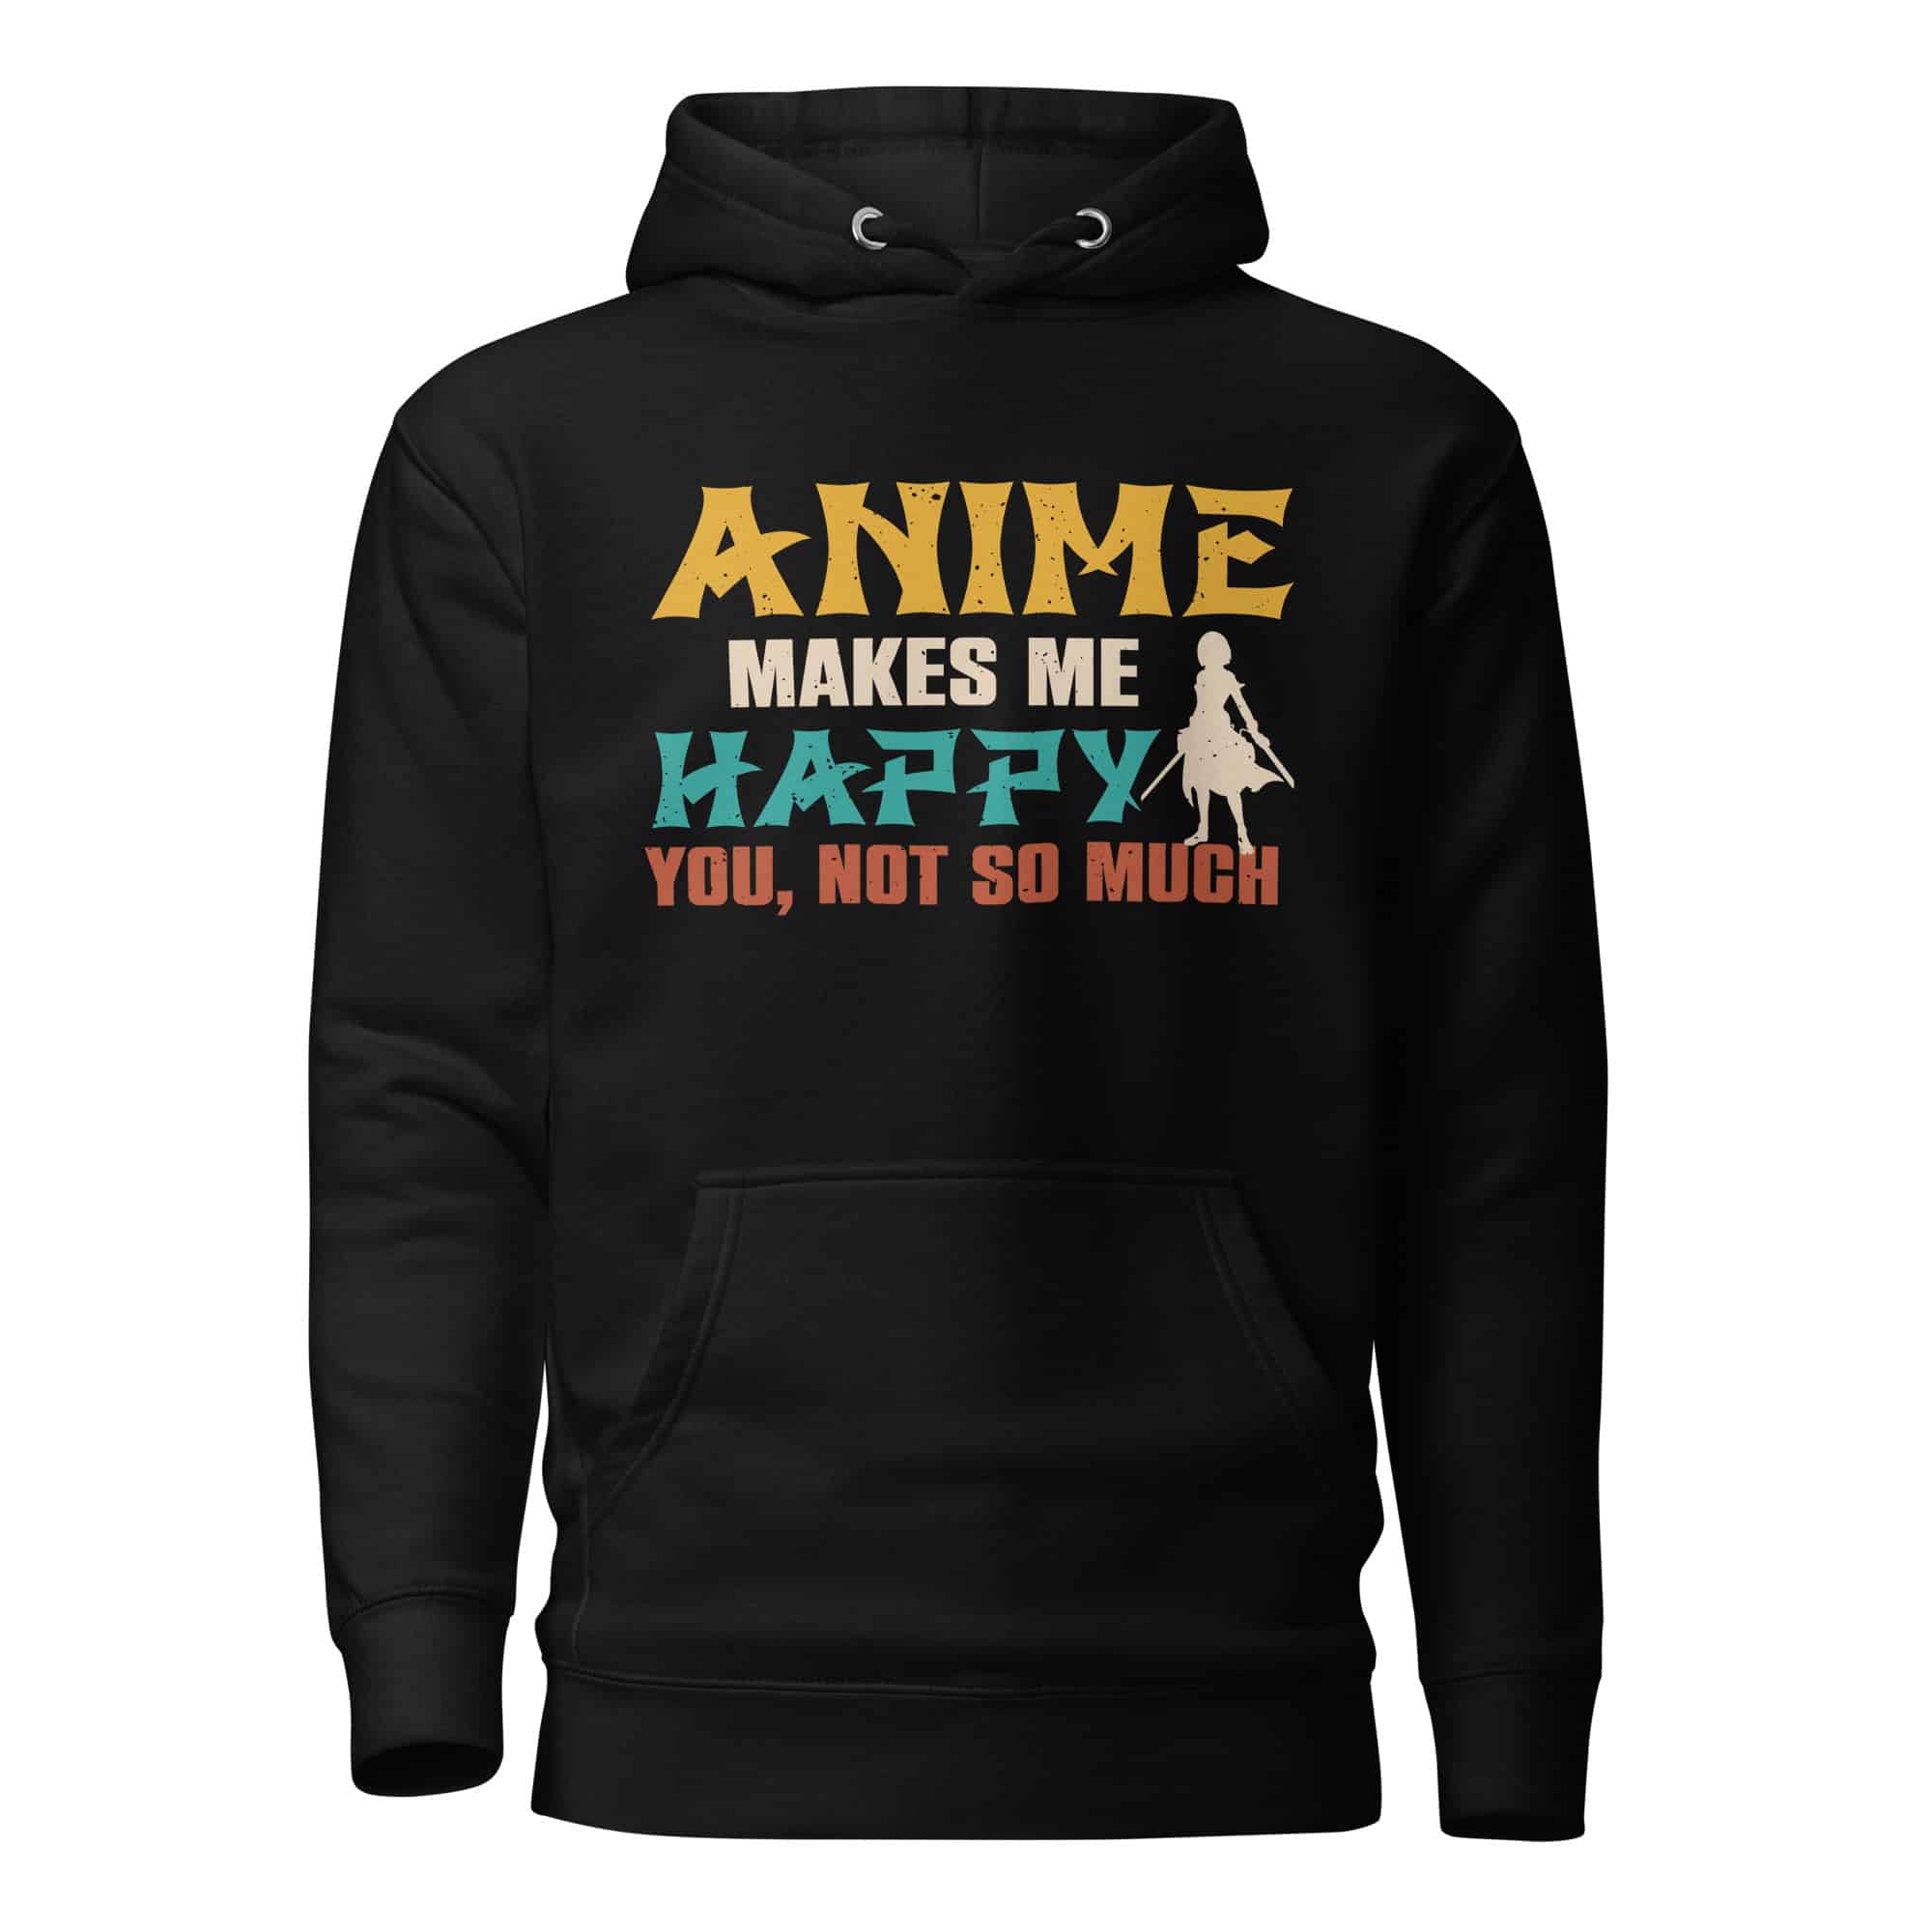 Anime Makes Me Happy Unisex Hoodie Video game store Gaming merchandise Gaming accessories shop Online gaming store Video game shop near me Gaming console store PC gaming store Gaming gear shop Retro gaming shop Board game shop Anime merchandise Anime store online Japanese anime shop Anime figurines Manga shop Anime DVDs Anime accessories Anime apparel Anime collectibles Anime gifts